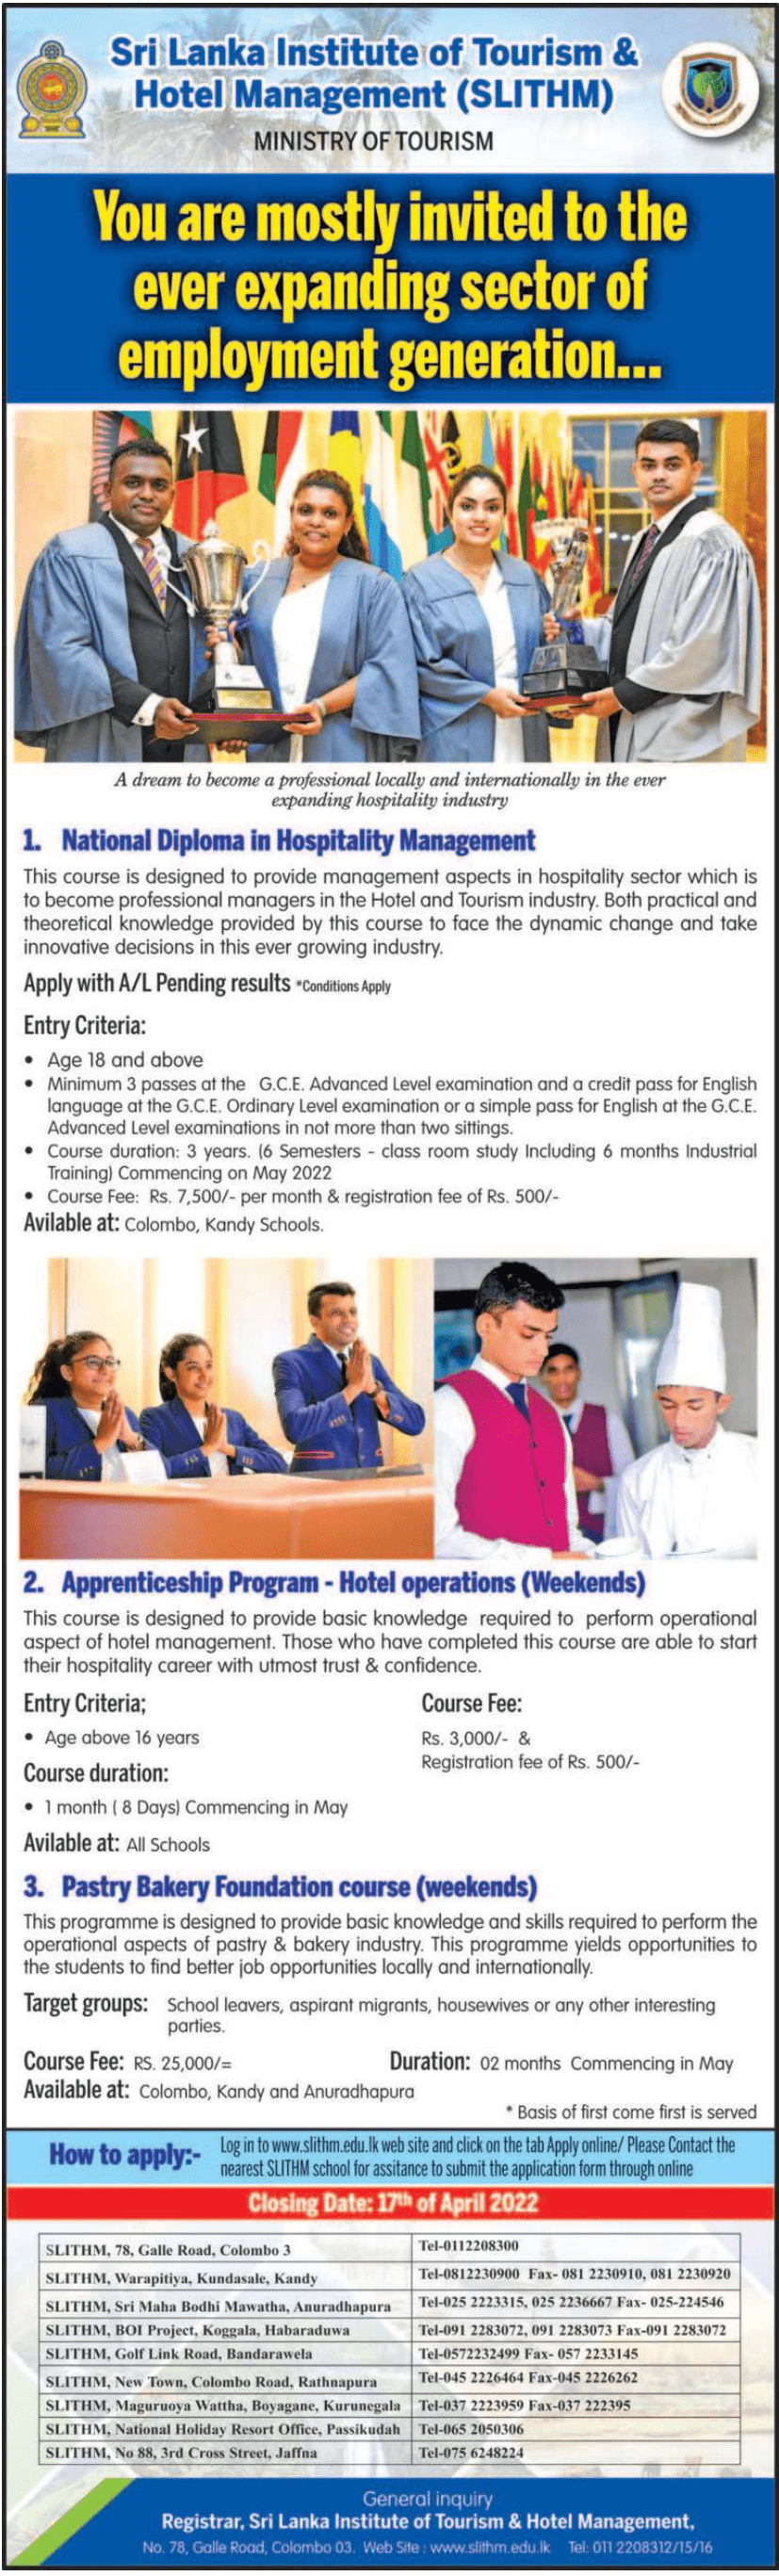 SLITHM Courses 2022 - National Diploma in Hospitality Management, Apprenticeship Program (Hotel Operations), Pastry Bakery Foundation Course